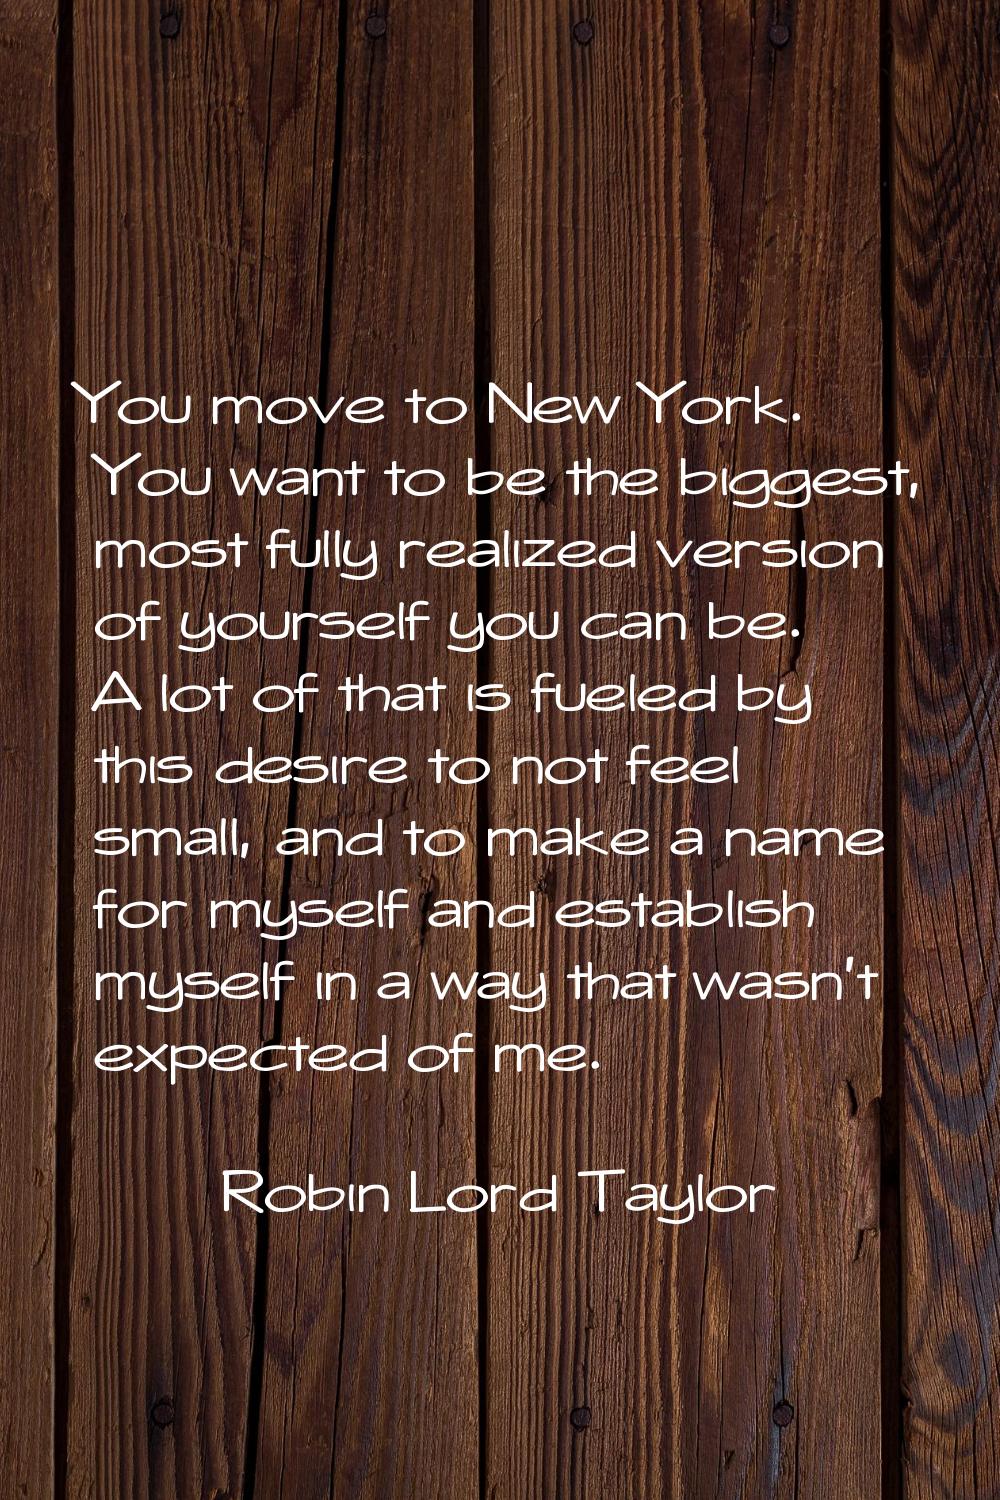 You move to New York. You want to be the biggest, most fully realized version of yourself you can b